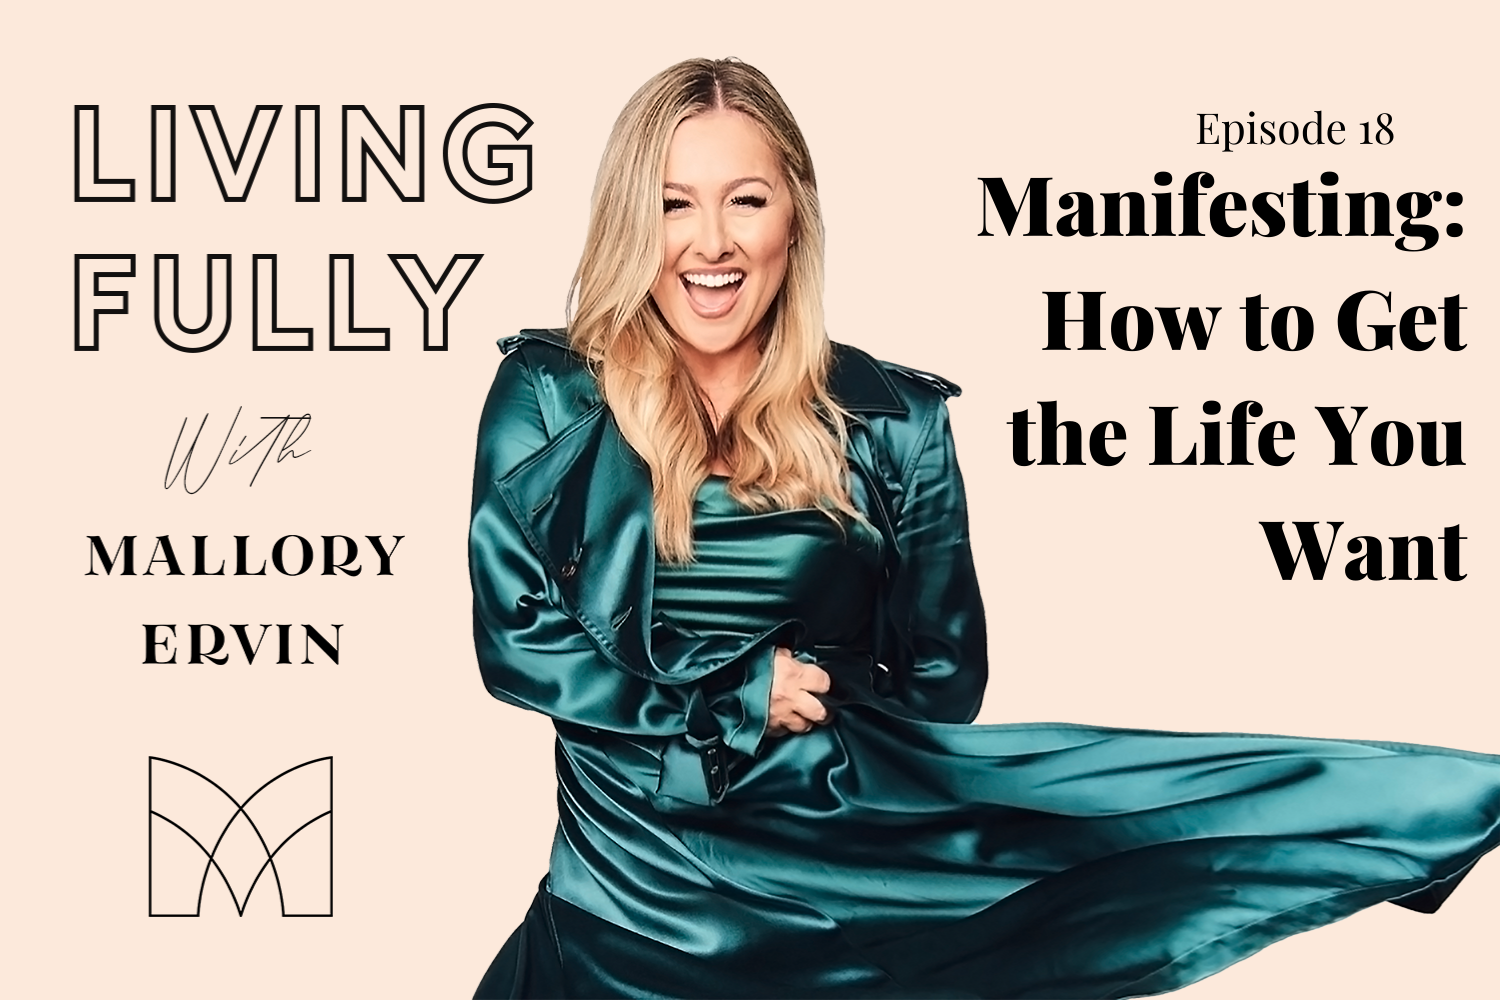 Manifesting: How to Get the Life You Want